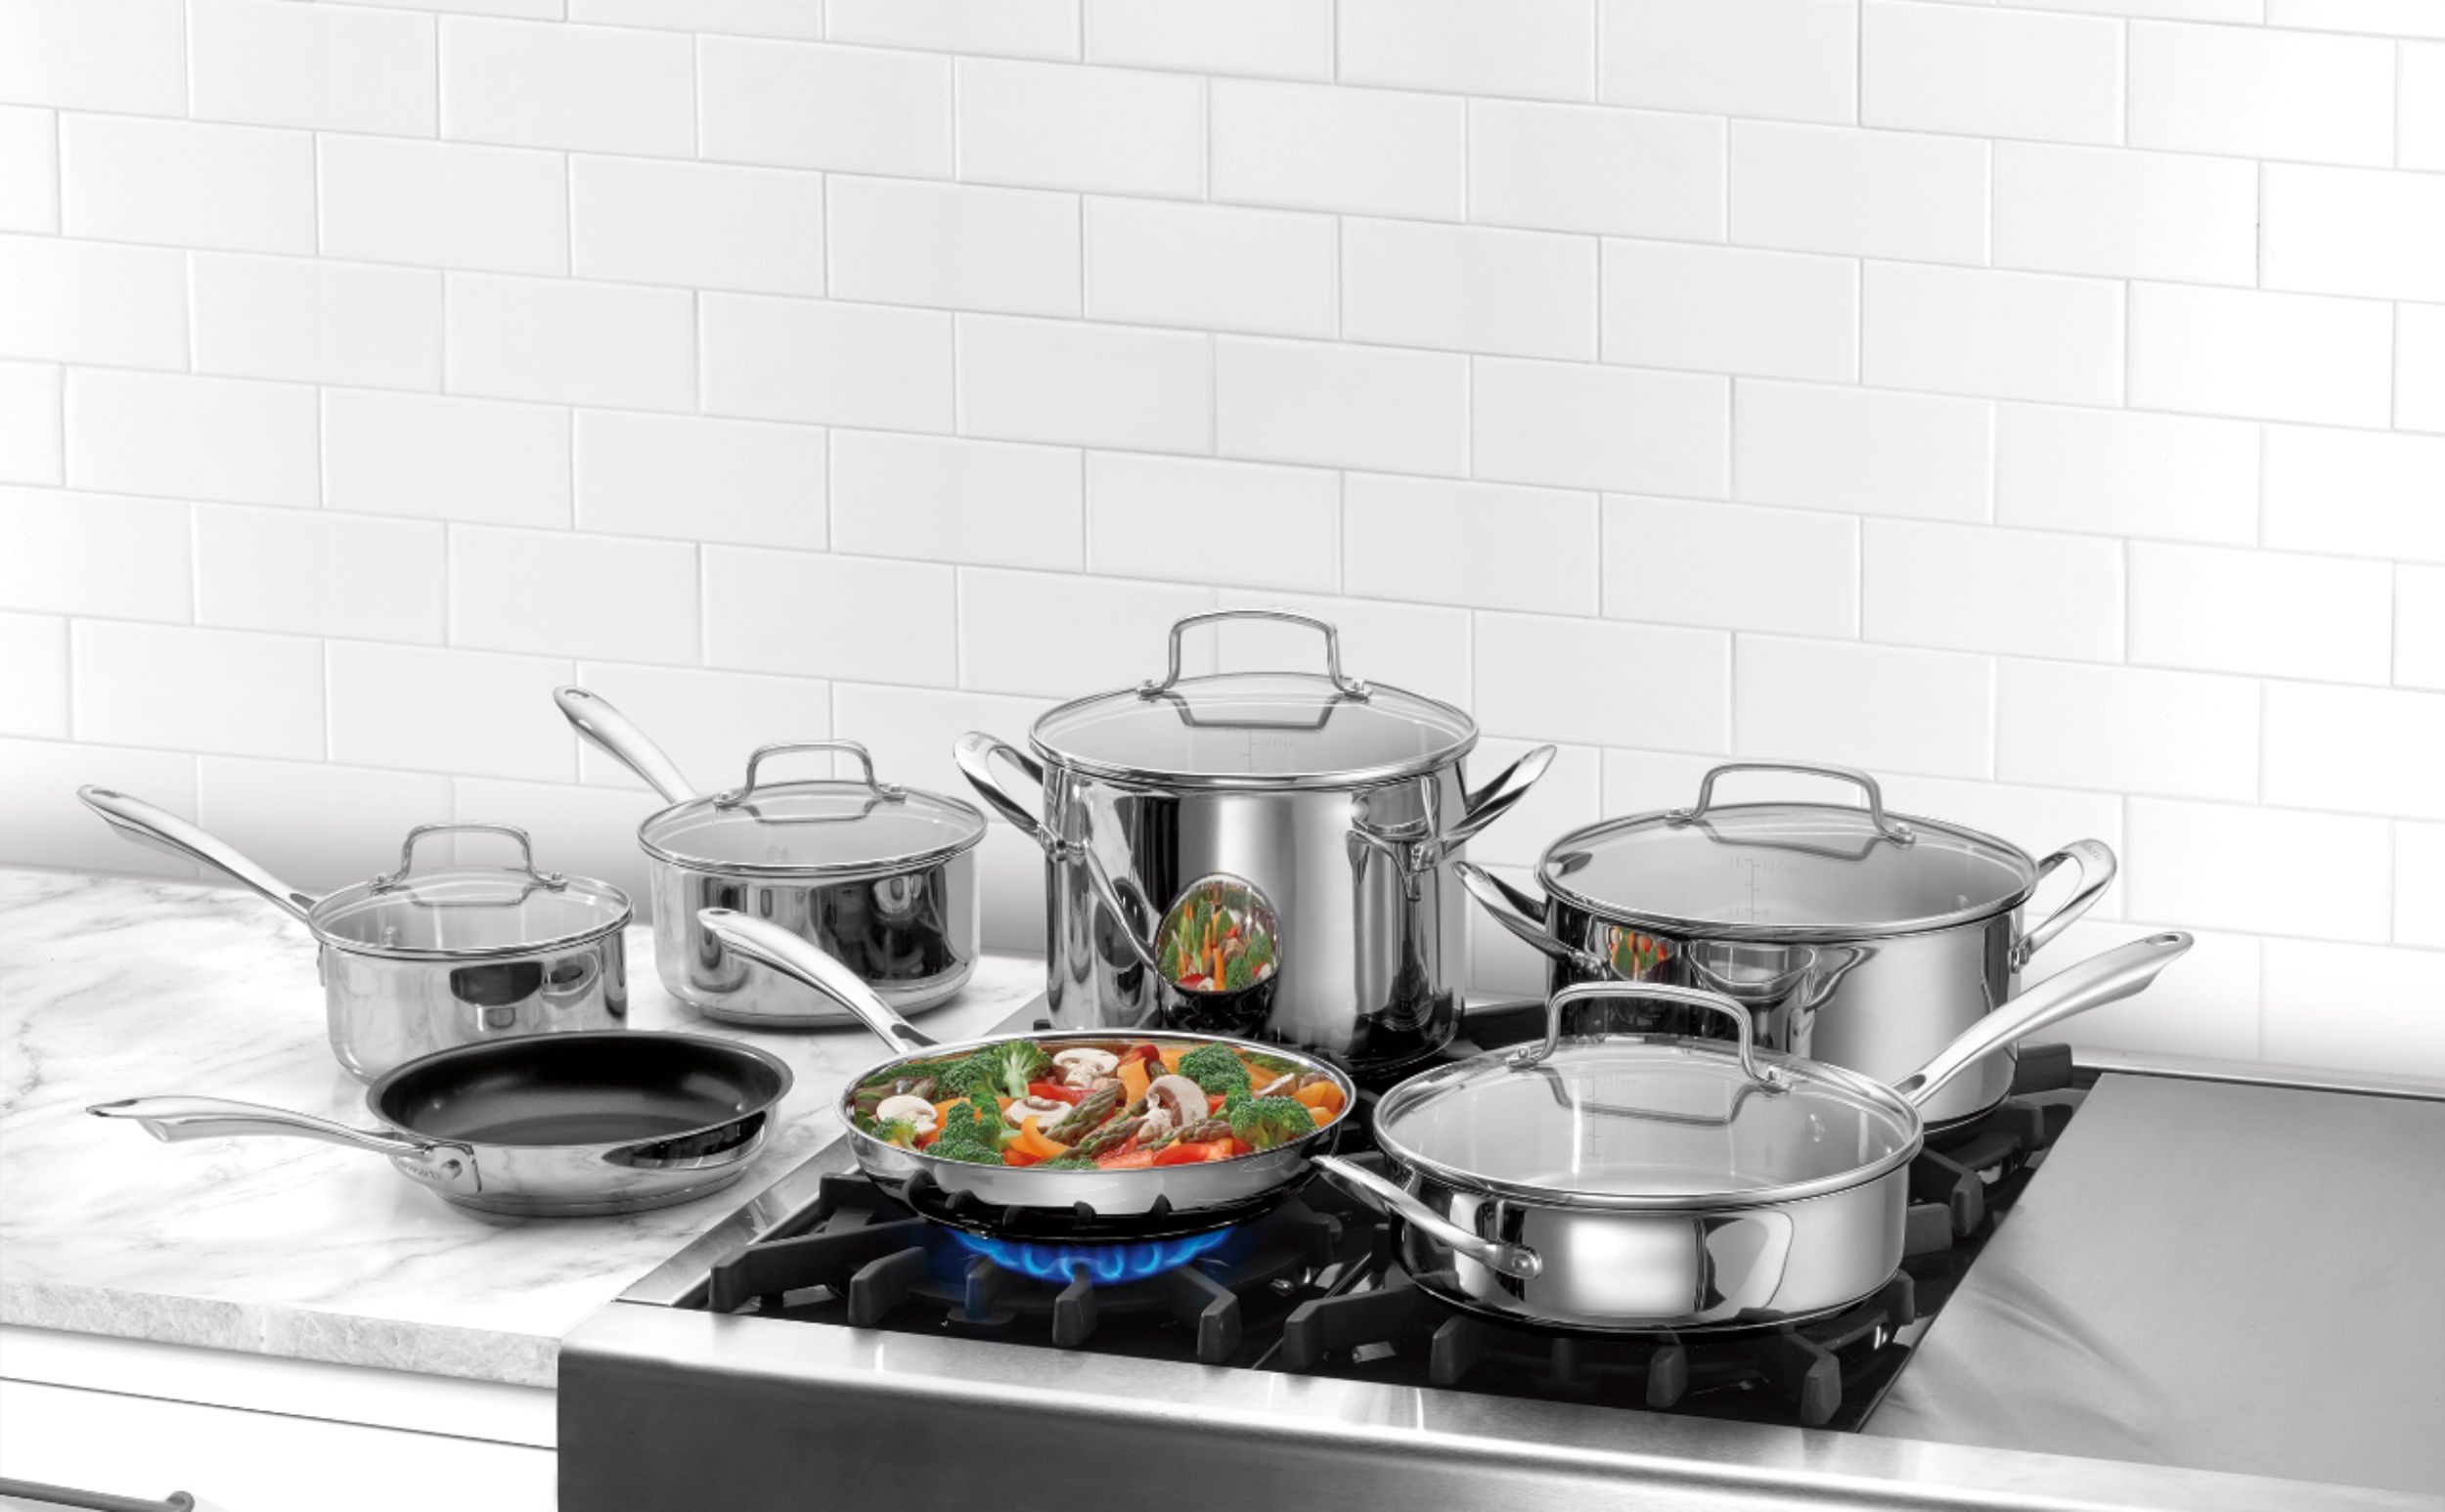 Questions and Answers: Cuisinart 12-Piece Cookware Set Stainless Steel Cuisinart 12 Piece Cookware Set Stainless Steel P87 12